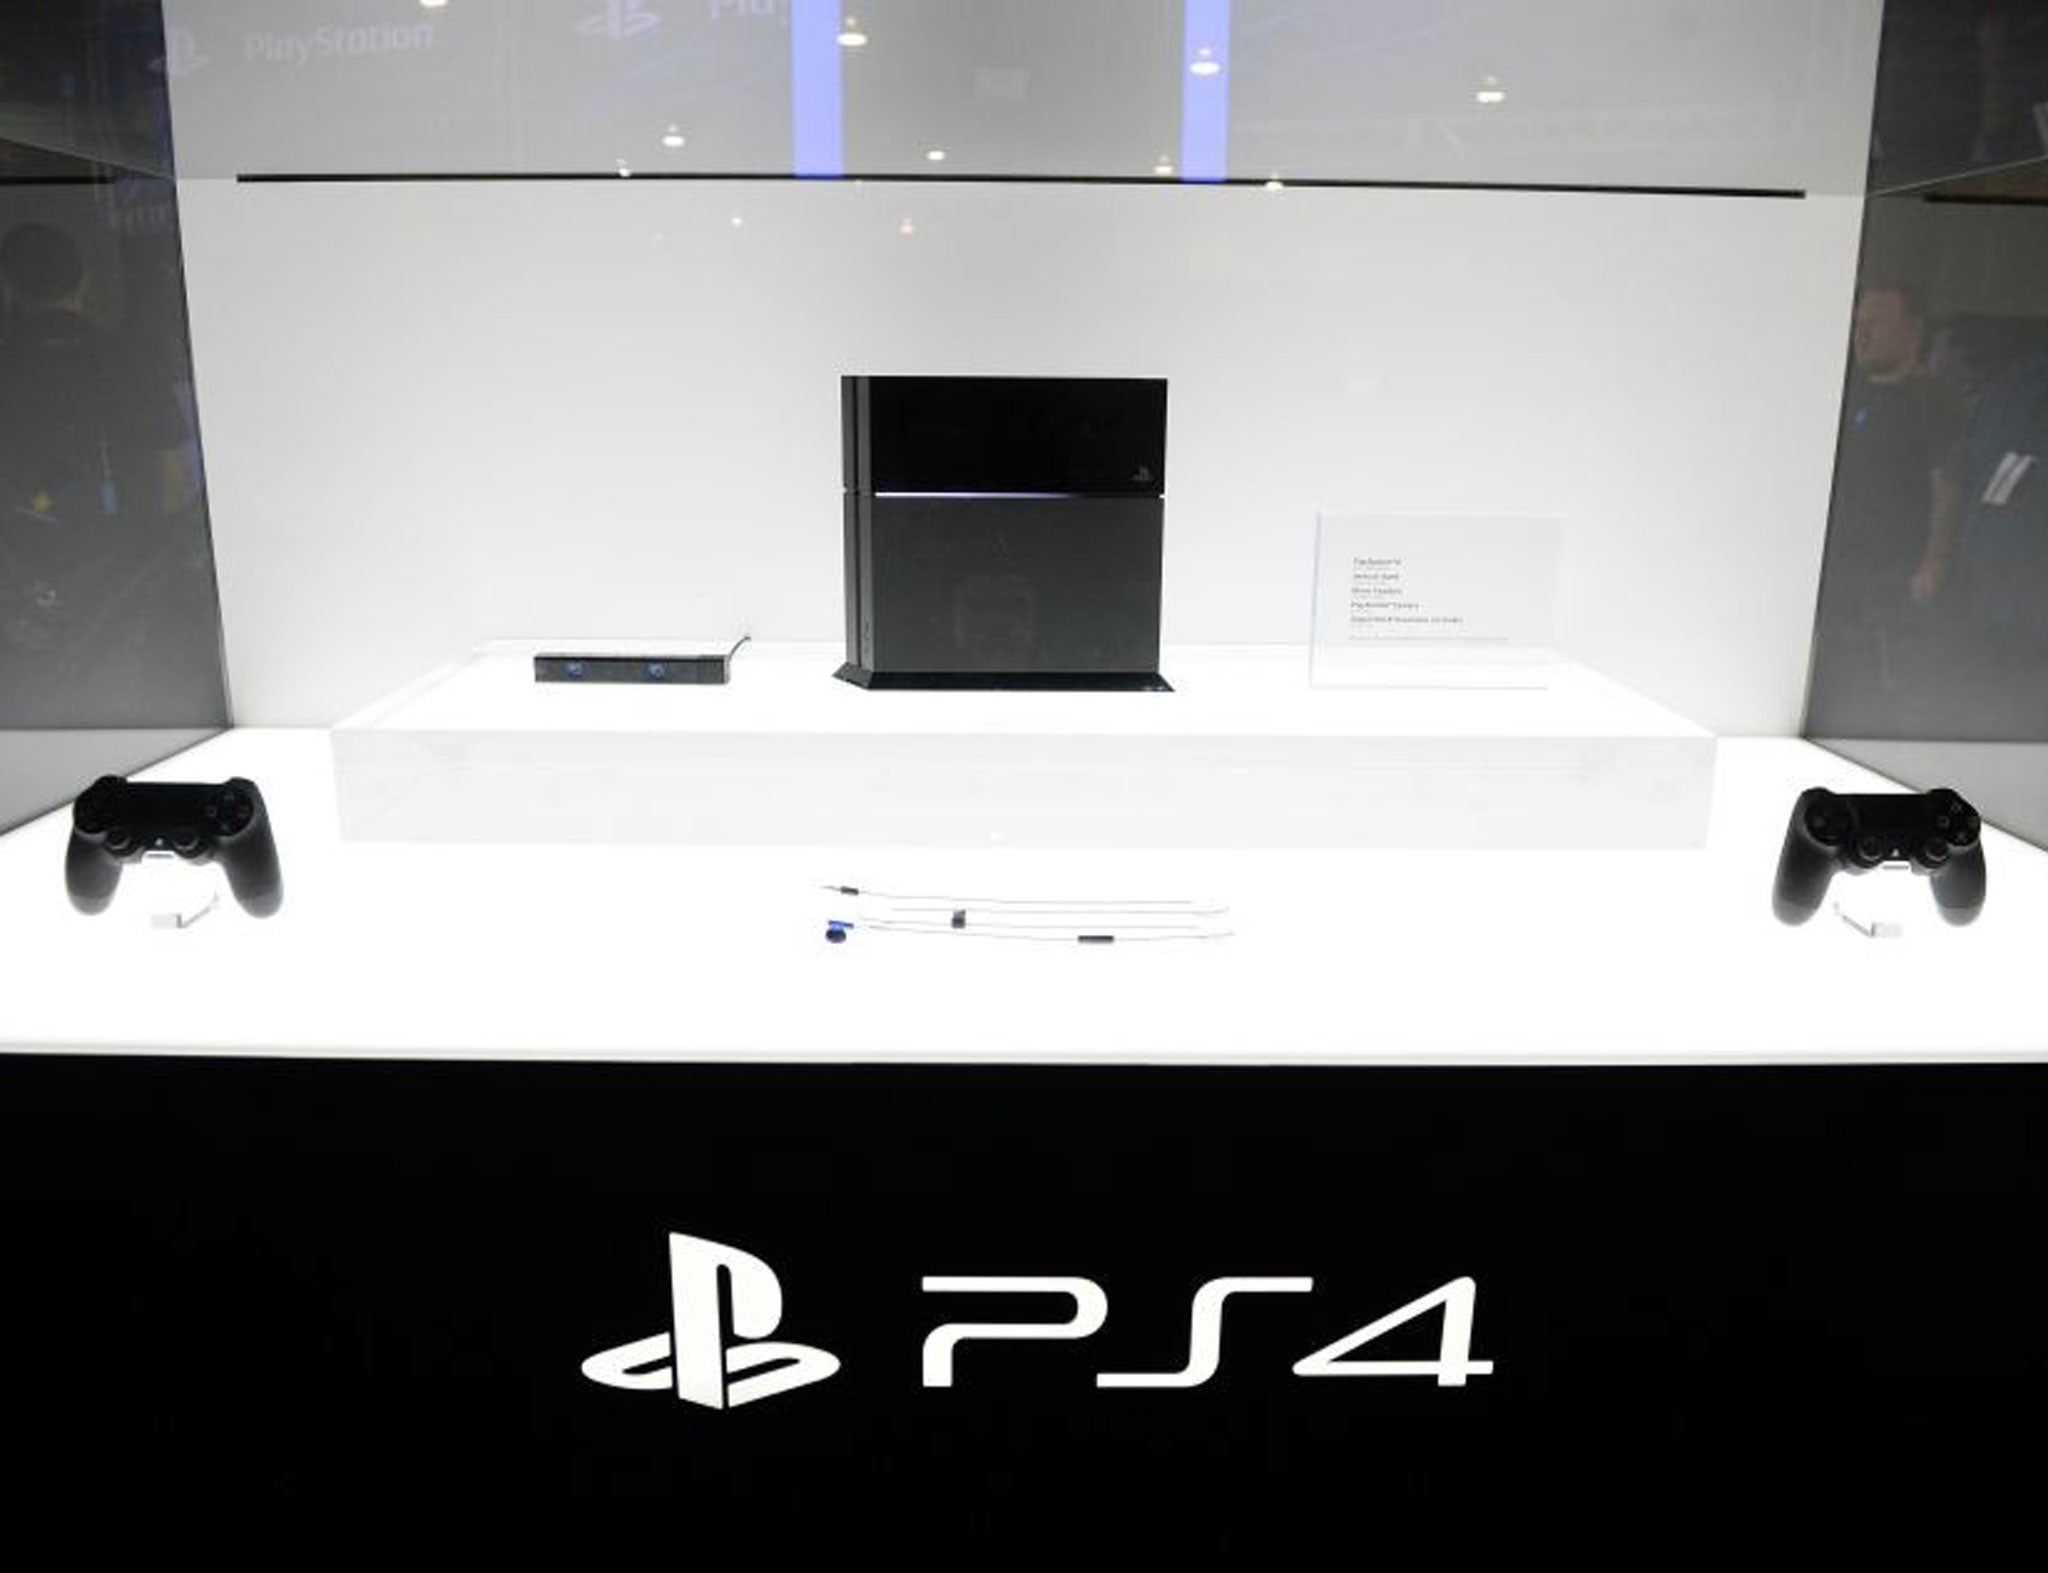 £349 console will be available in the UK in November